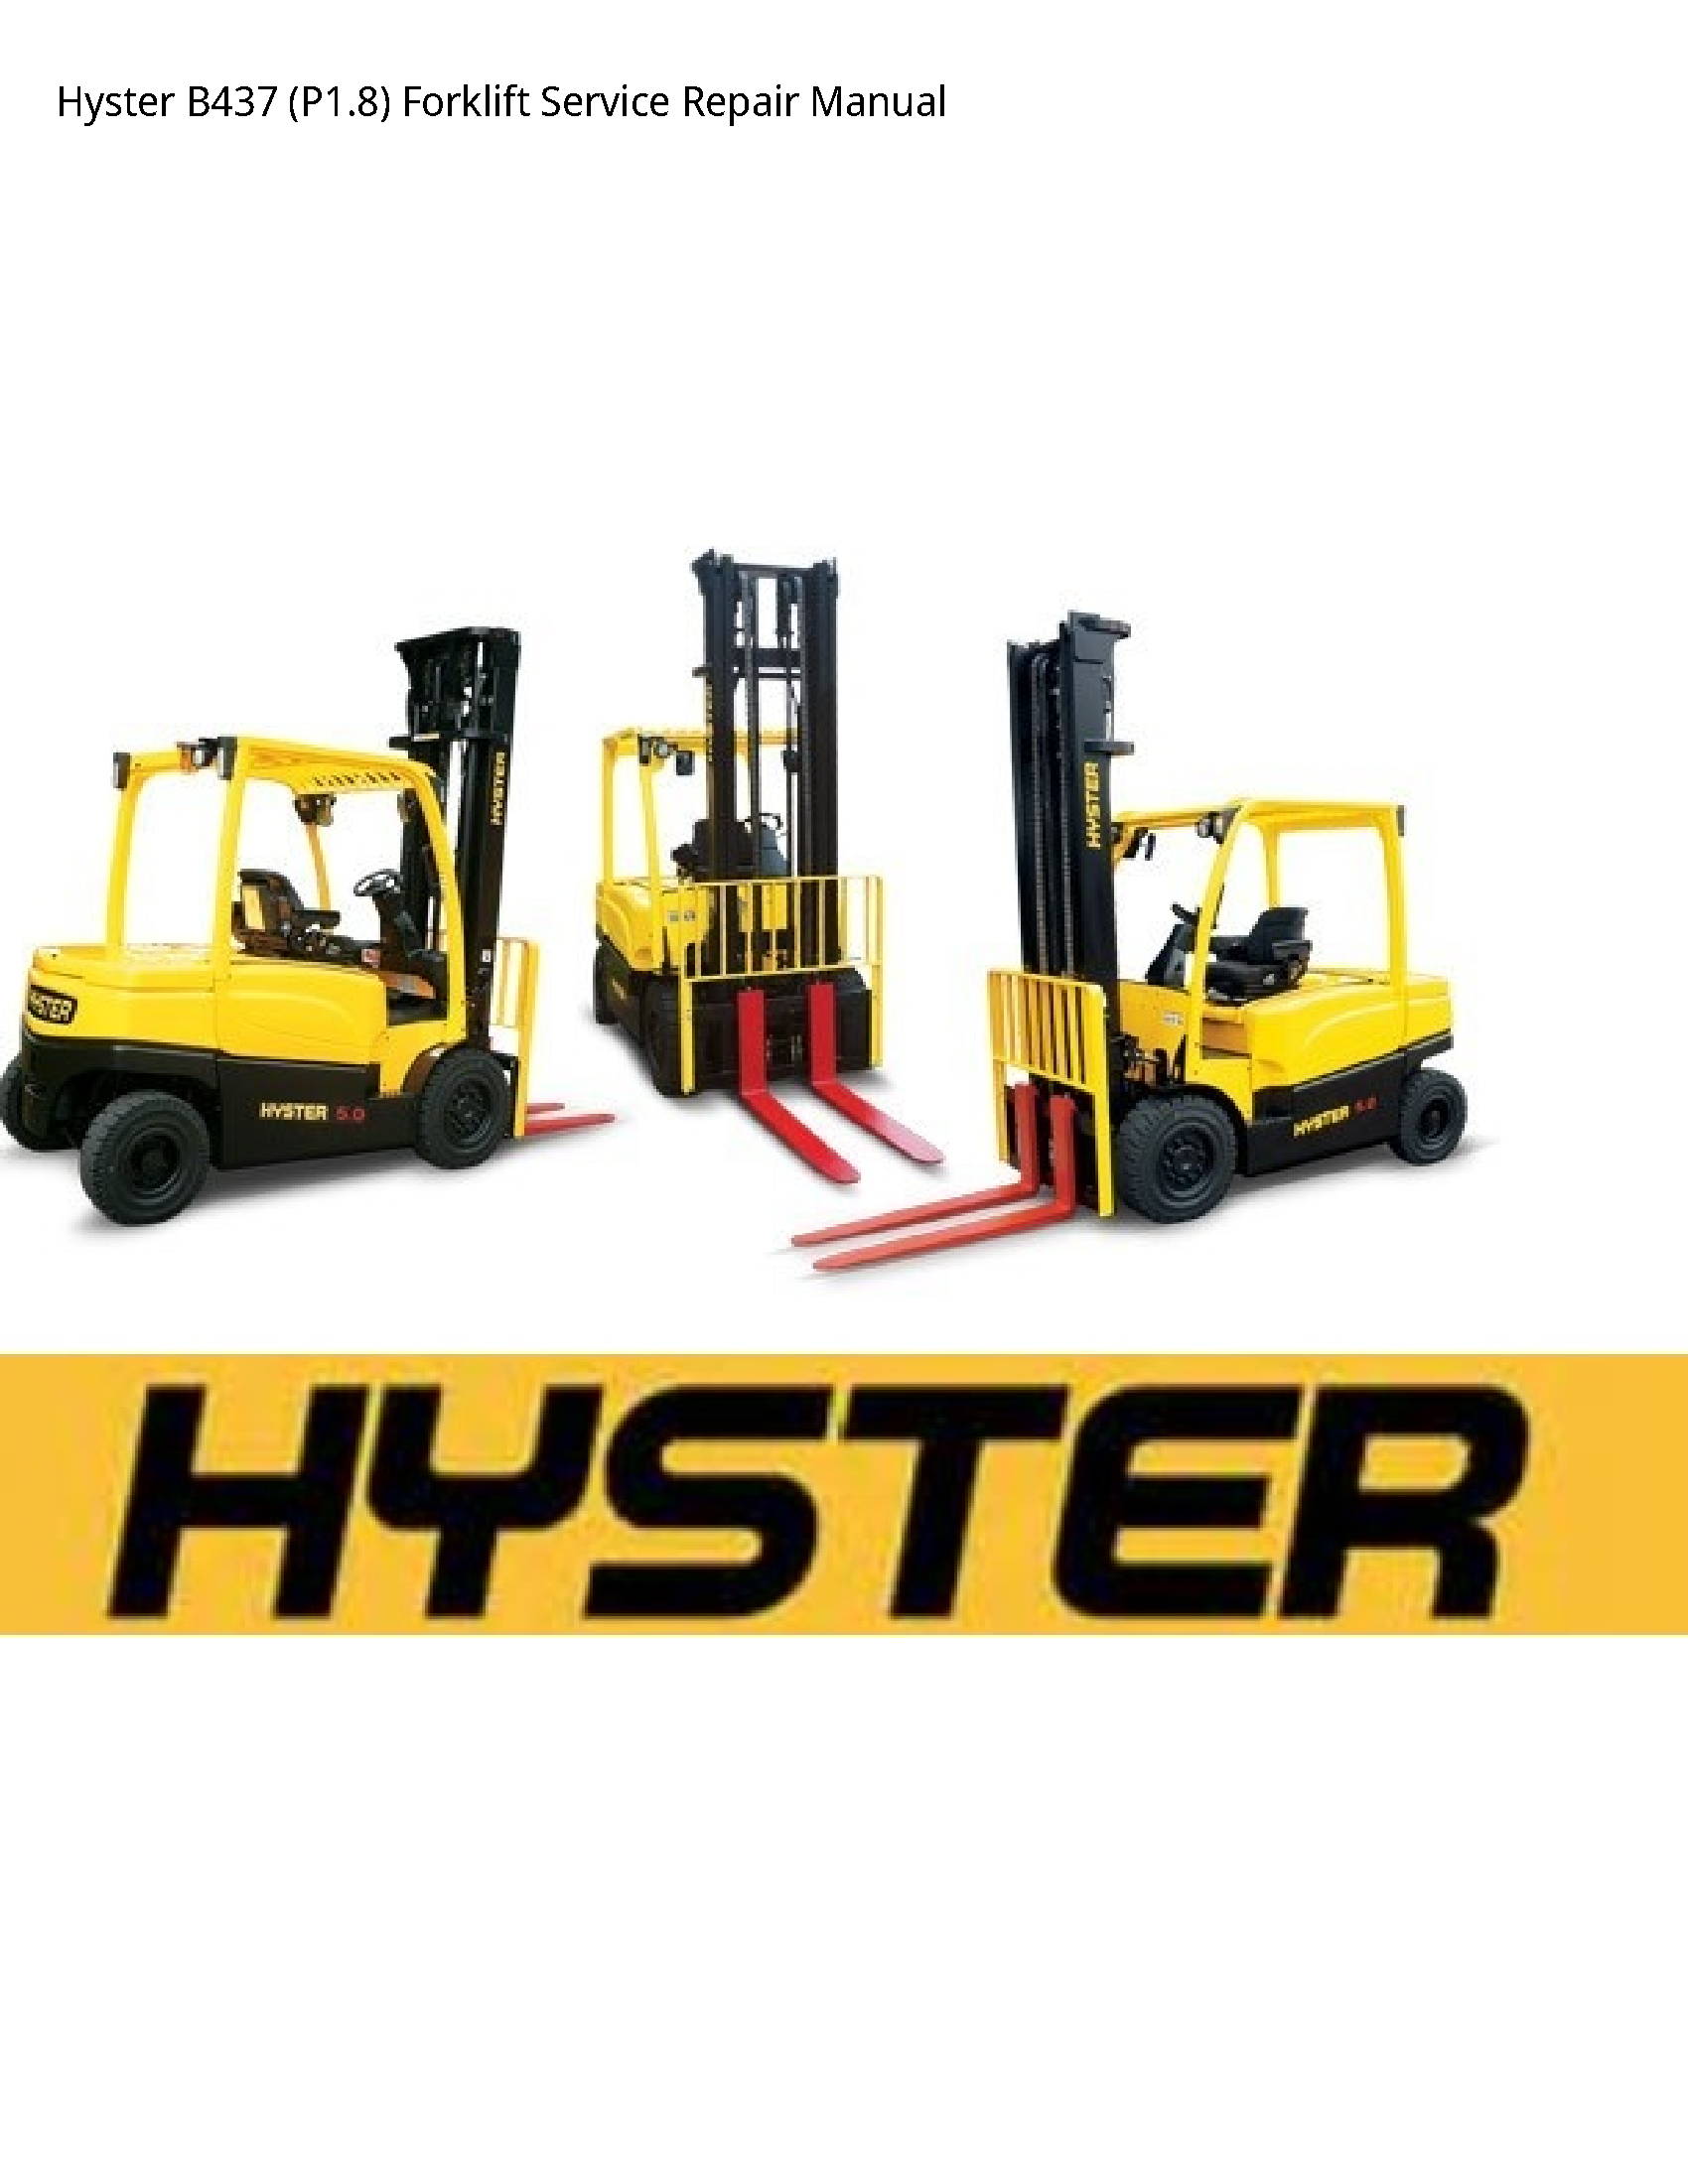 Hyster B437 Forklift manual